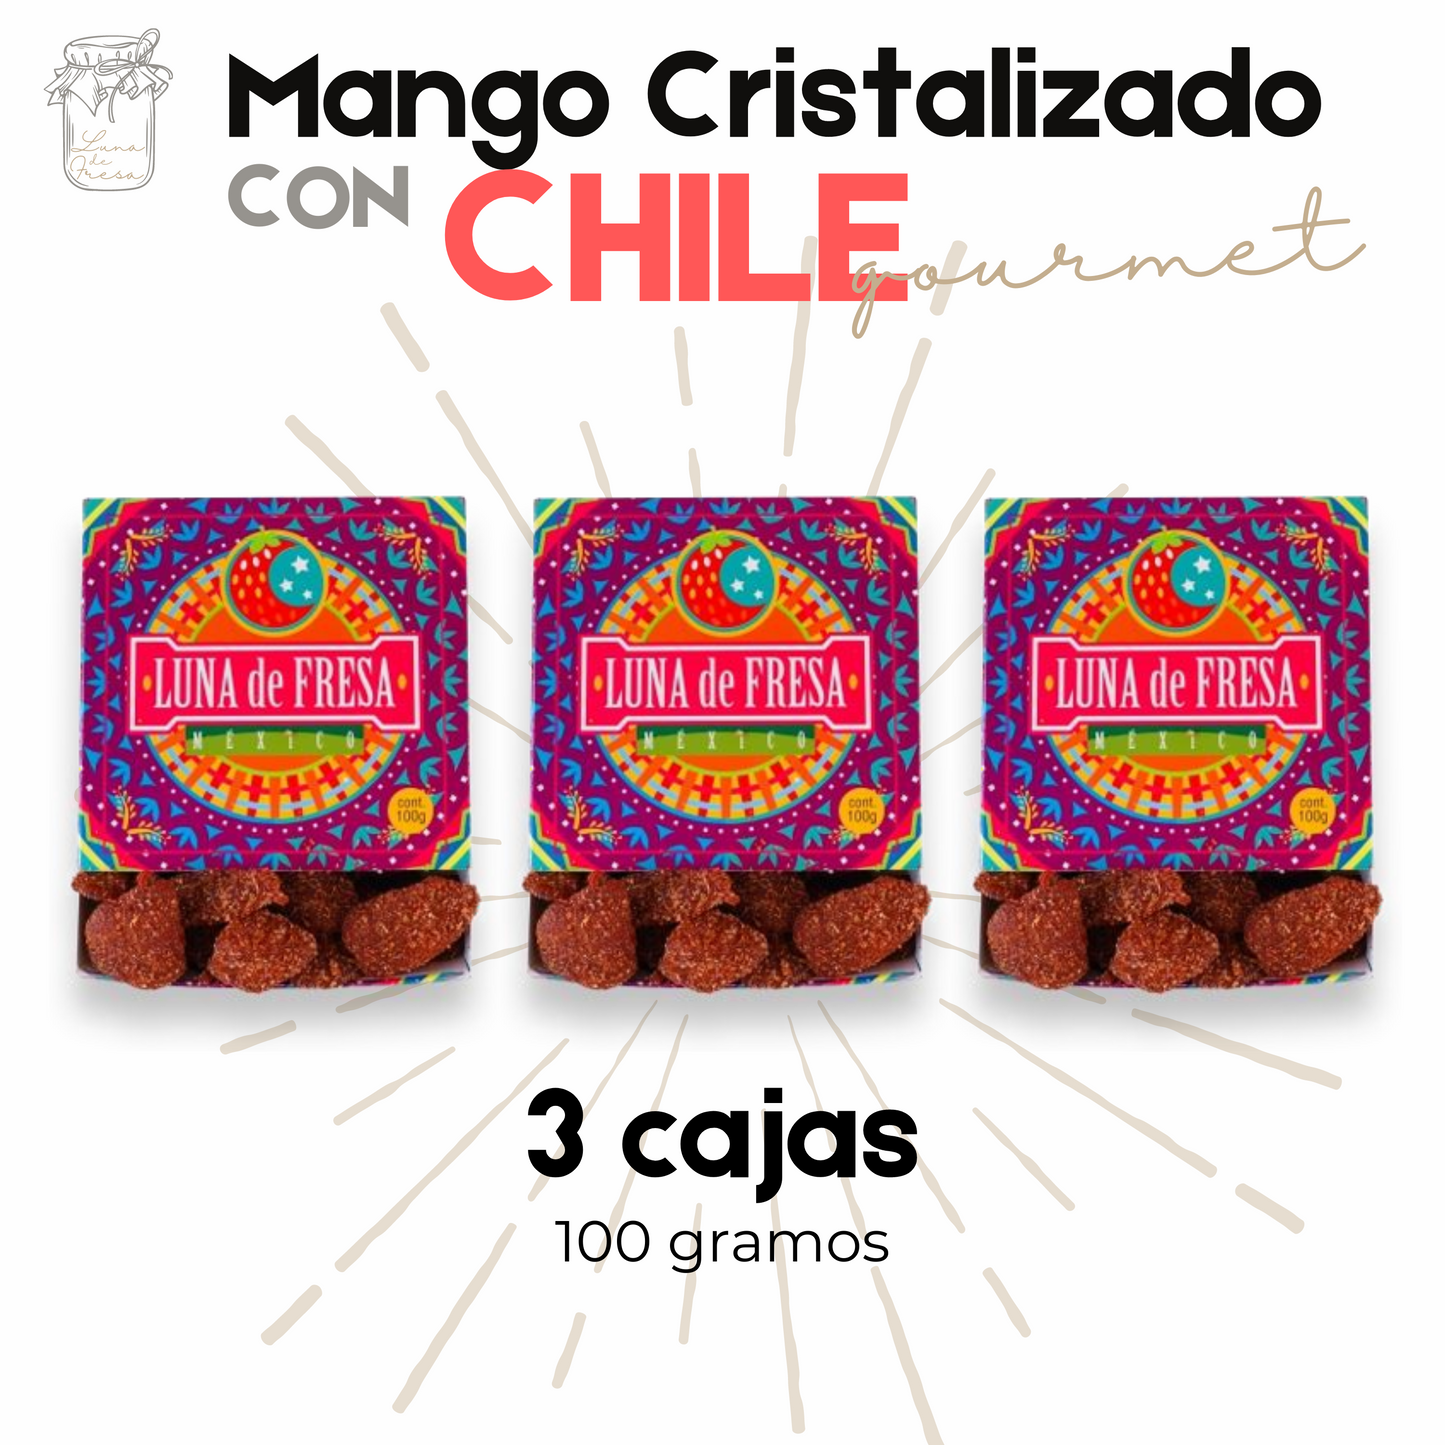 Mango con Chile | Gourmet | Chamoy | 300g | Mexpofood